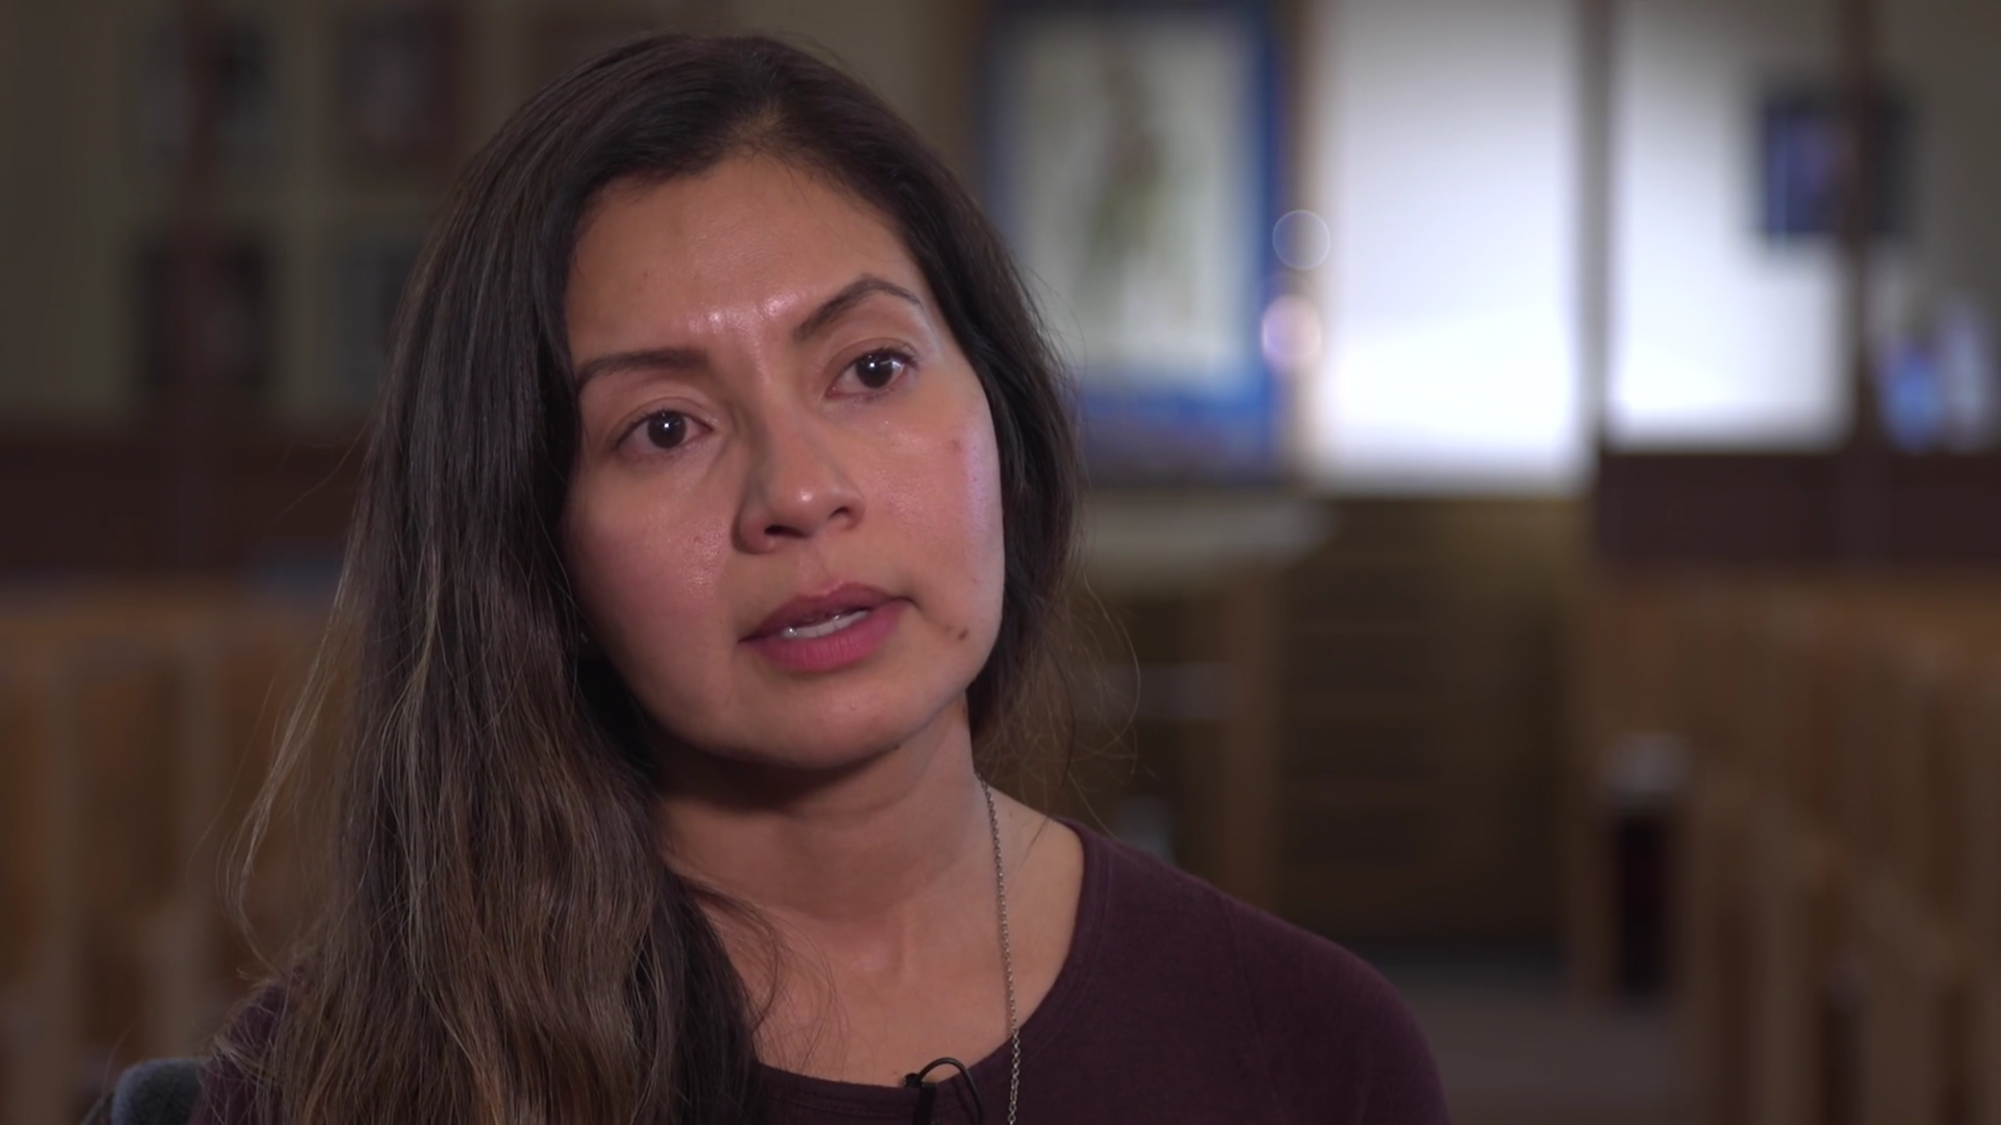 In a scene from the documentary “Doctrine of Discovery: Stolen Lands, Strong Hearts”, Marlena Anderson, of Nlaka’pamux First Nation, said she is the first generation of her family that didn’t attend residential school. “I carry my parents’ hurt.”